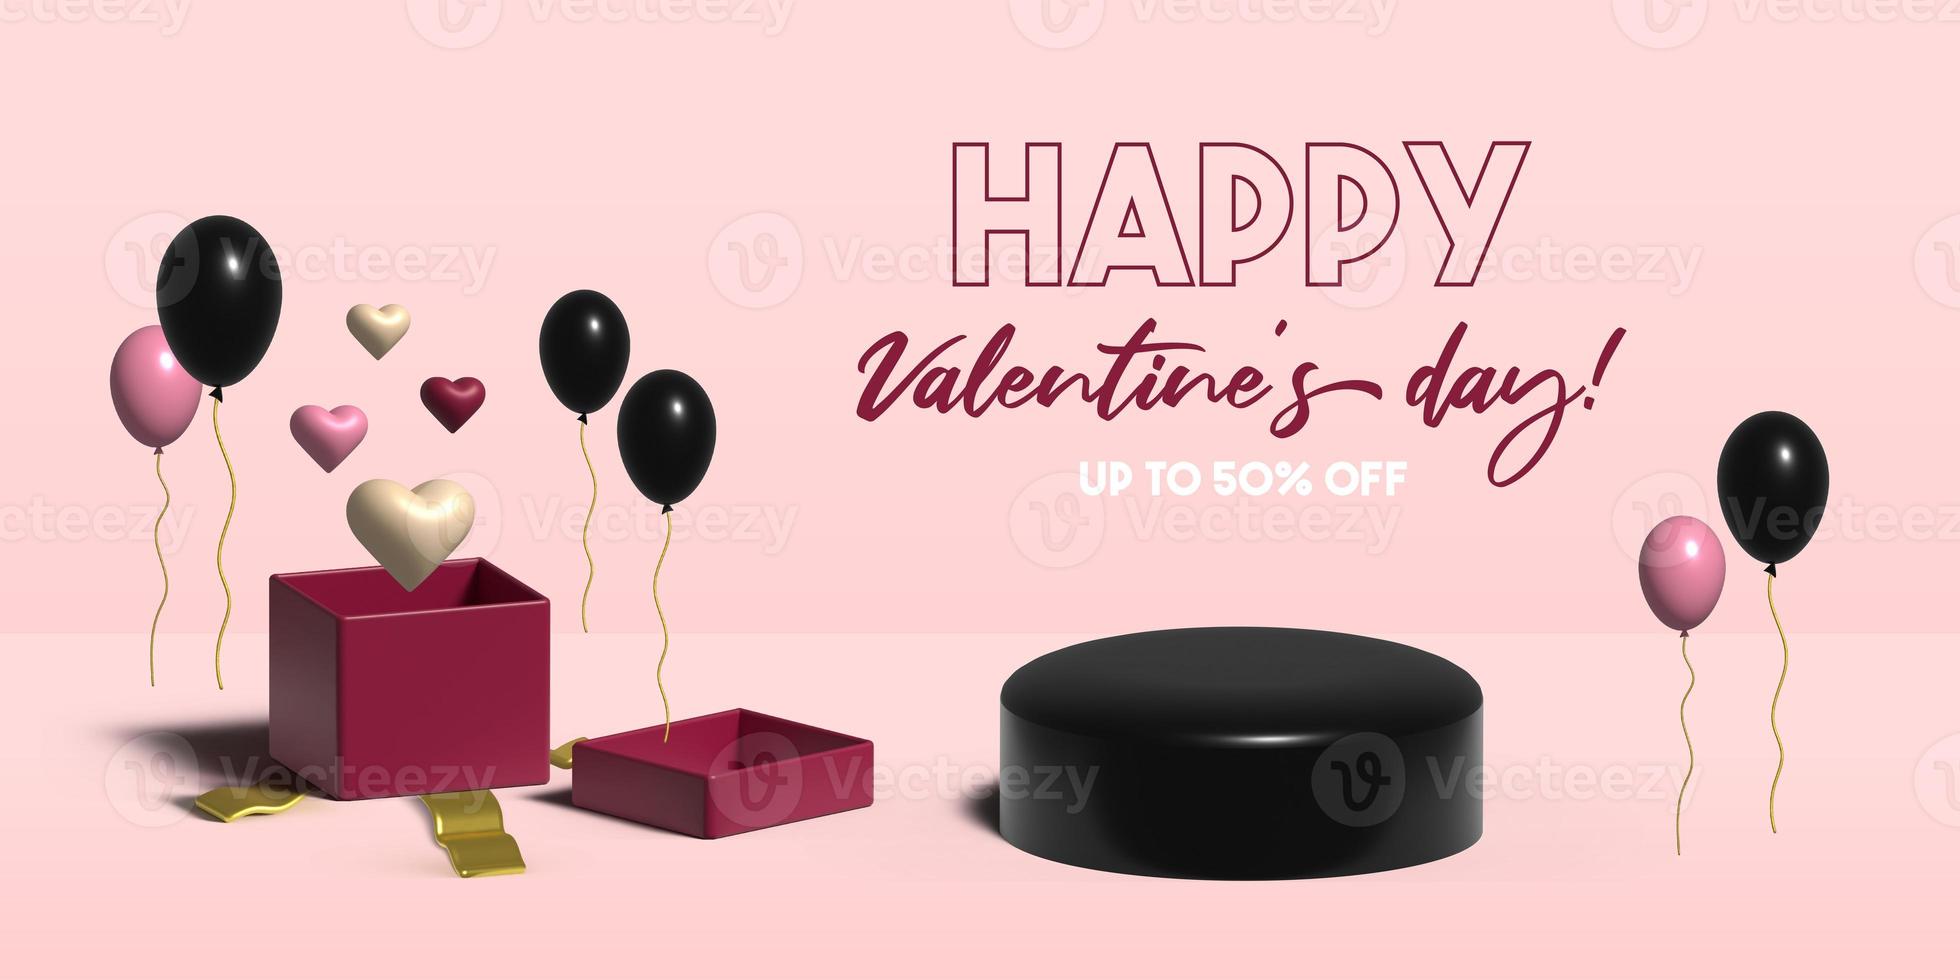 Valentine's day sale 3d banner with an opened present box, hearts flying out of the box, pink and black balloons, podium and Happy Valentine's day inscription. photo